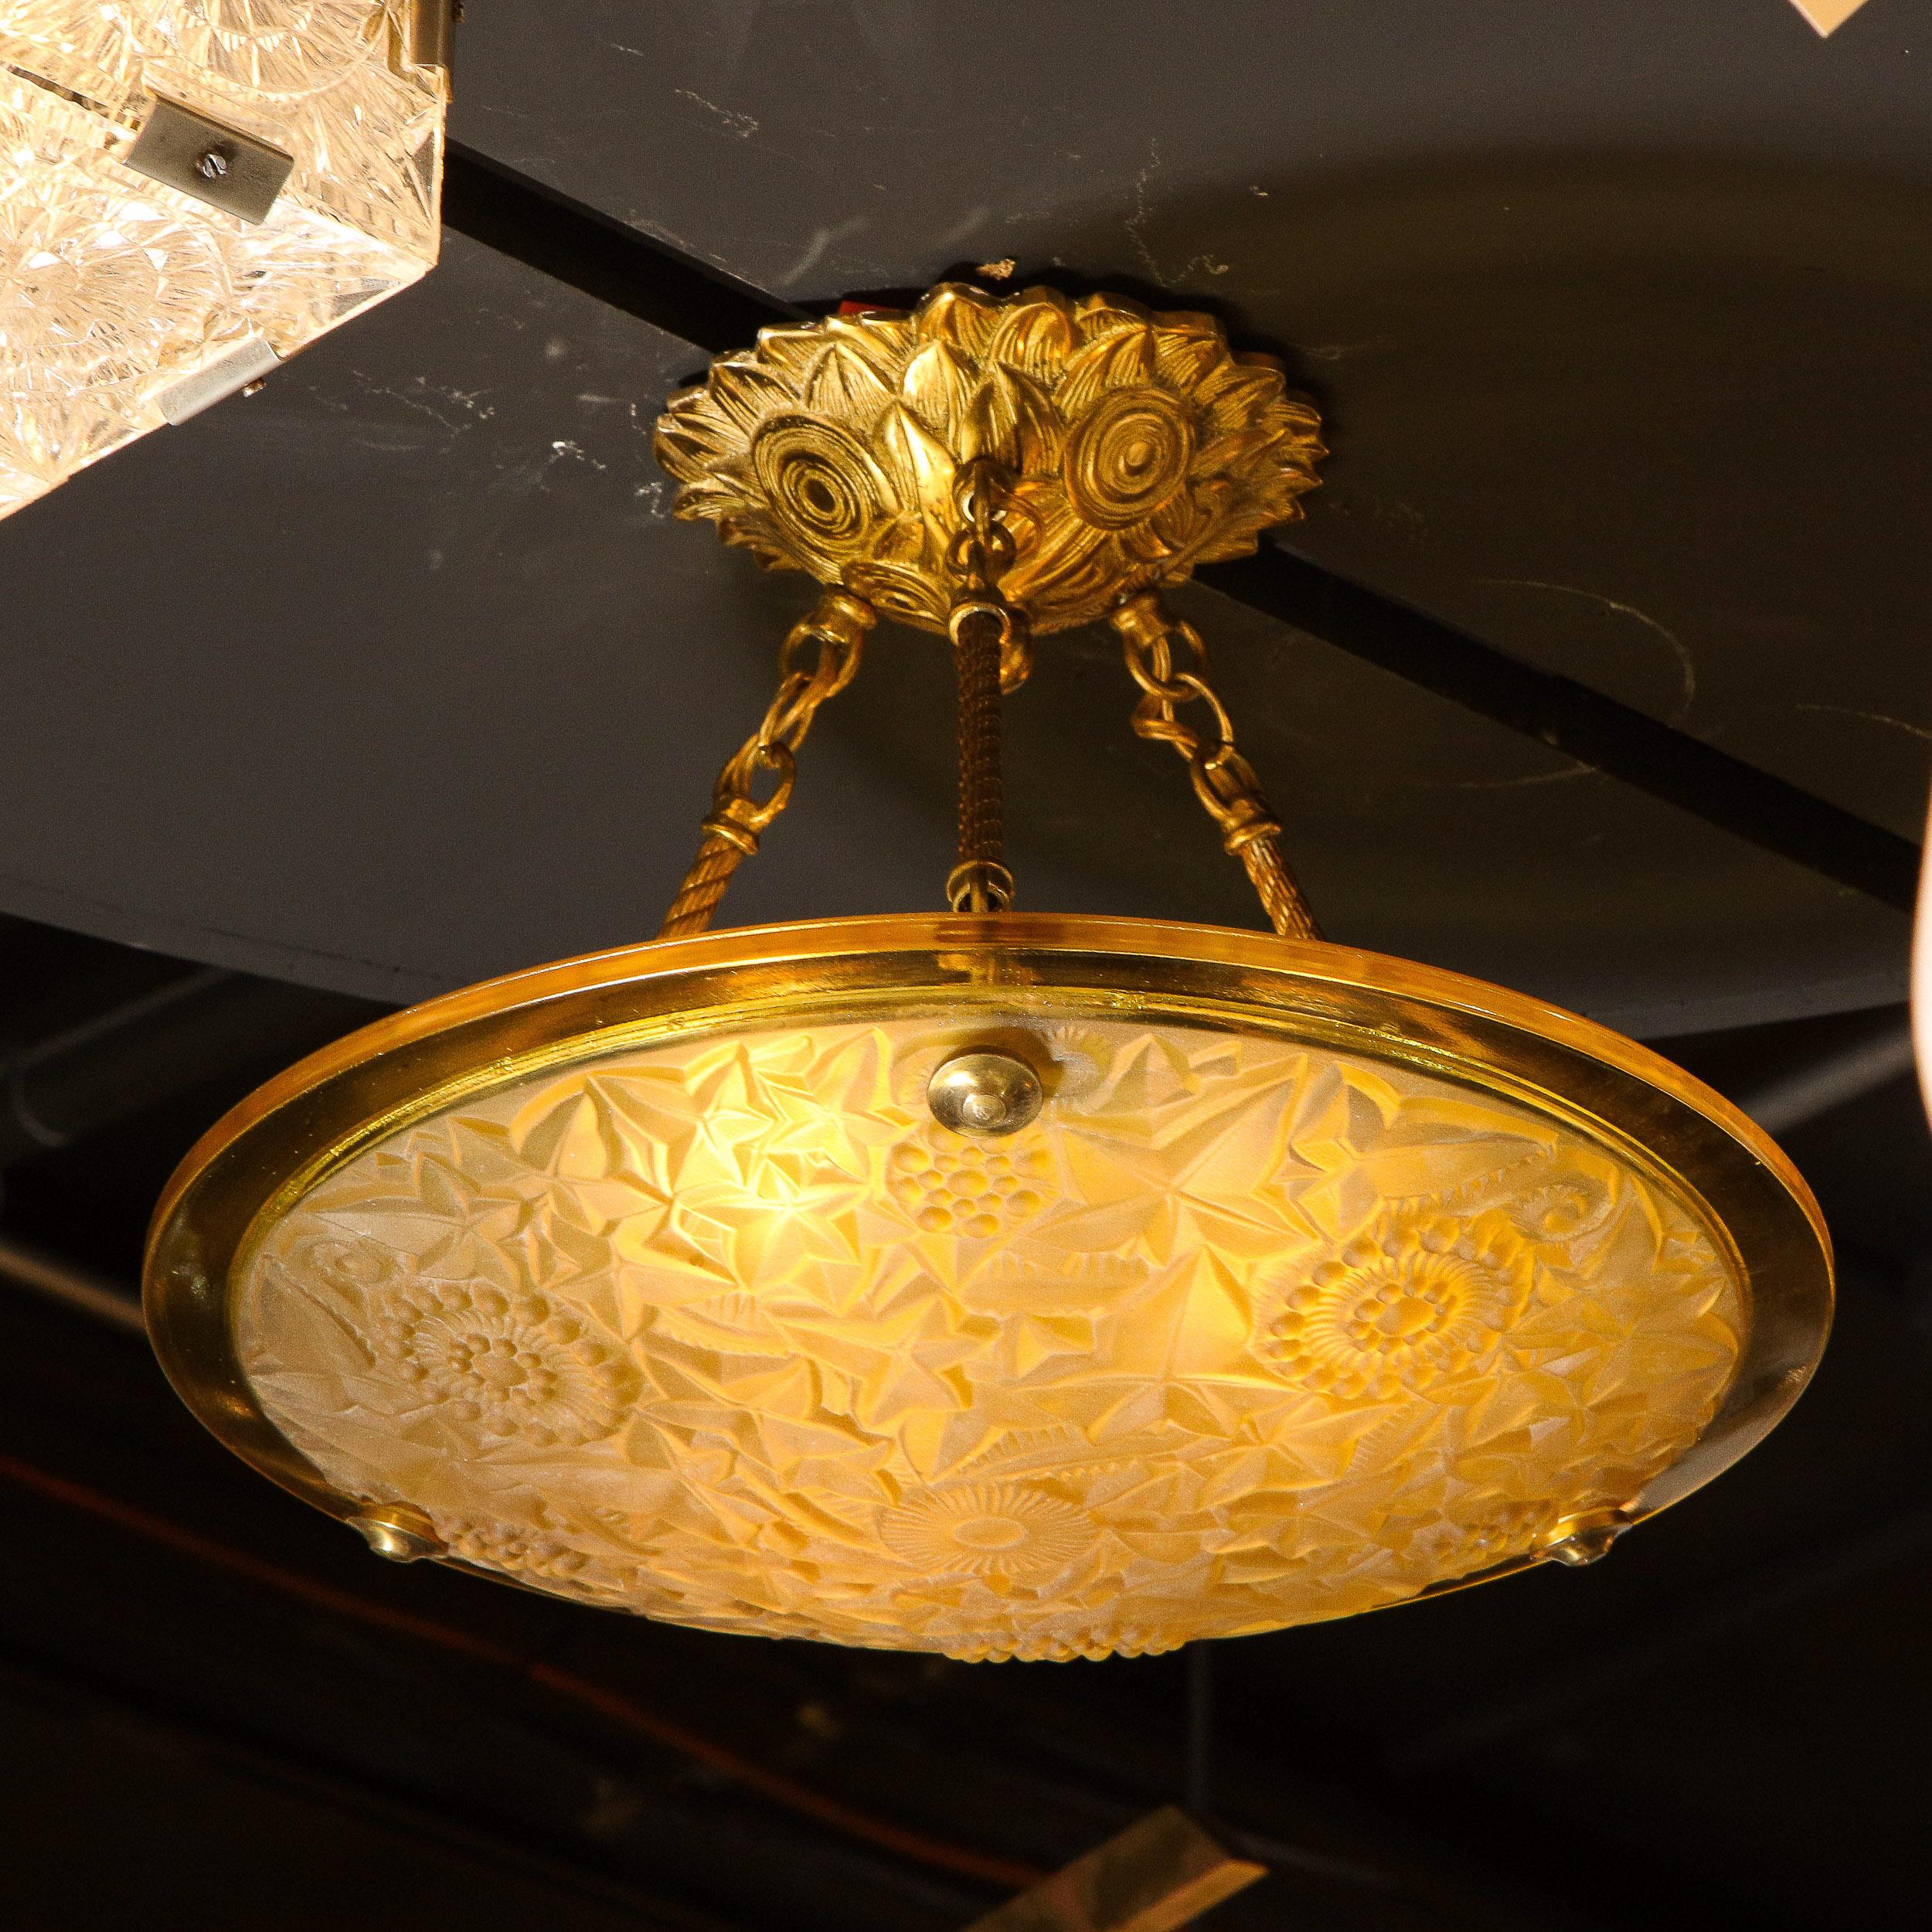 This stunning Art Deco pendant was realized in France circa 1930. It features a circular domed amber shade with a wealth of etched foliate and geometric cubist motifs- including stylized maple leaves- secured by gilded bronze fittings. The